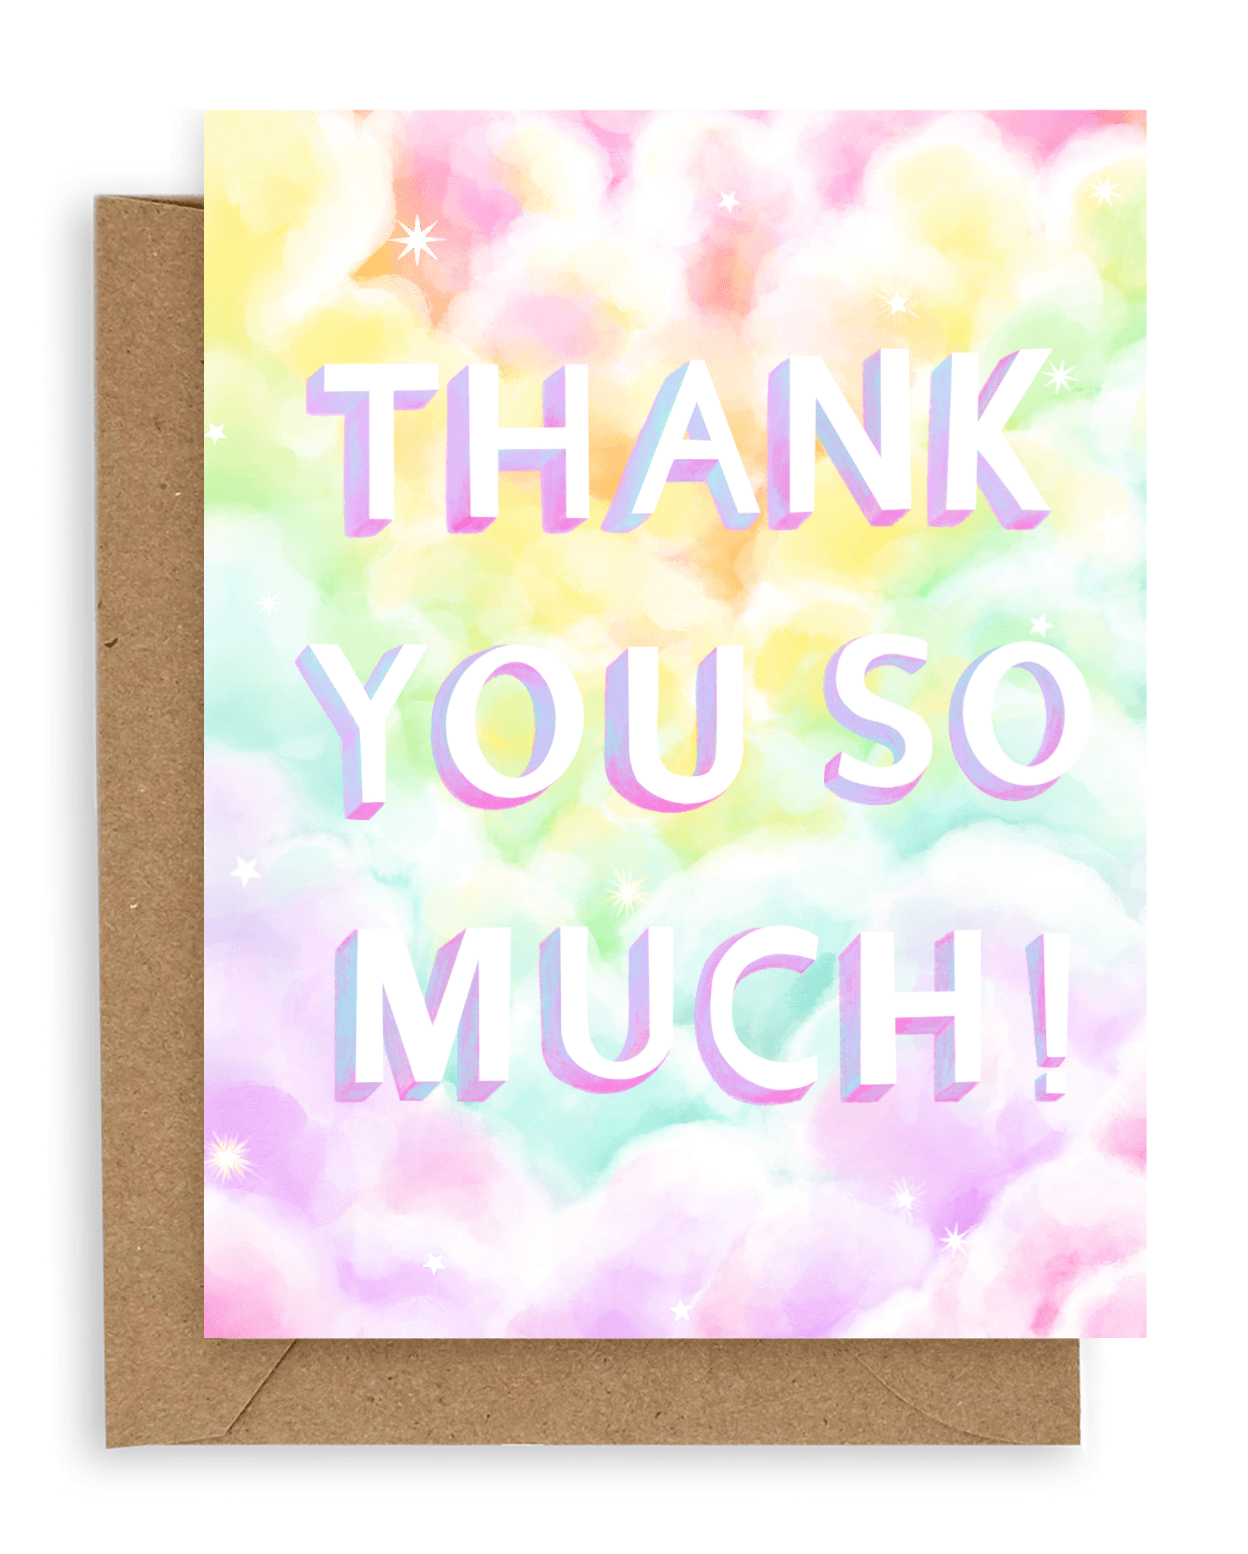 The words &quot;thank you so much!&quot; in white font printed on a rainbow clouds background. Shown with kraft envelope.